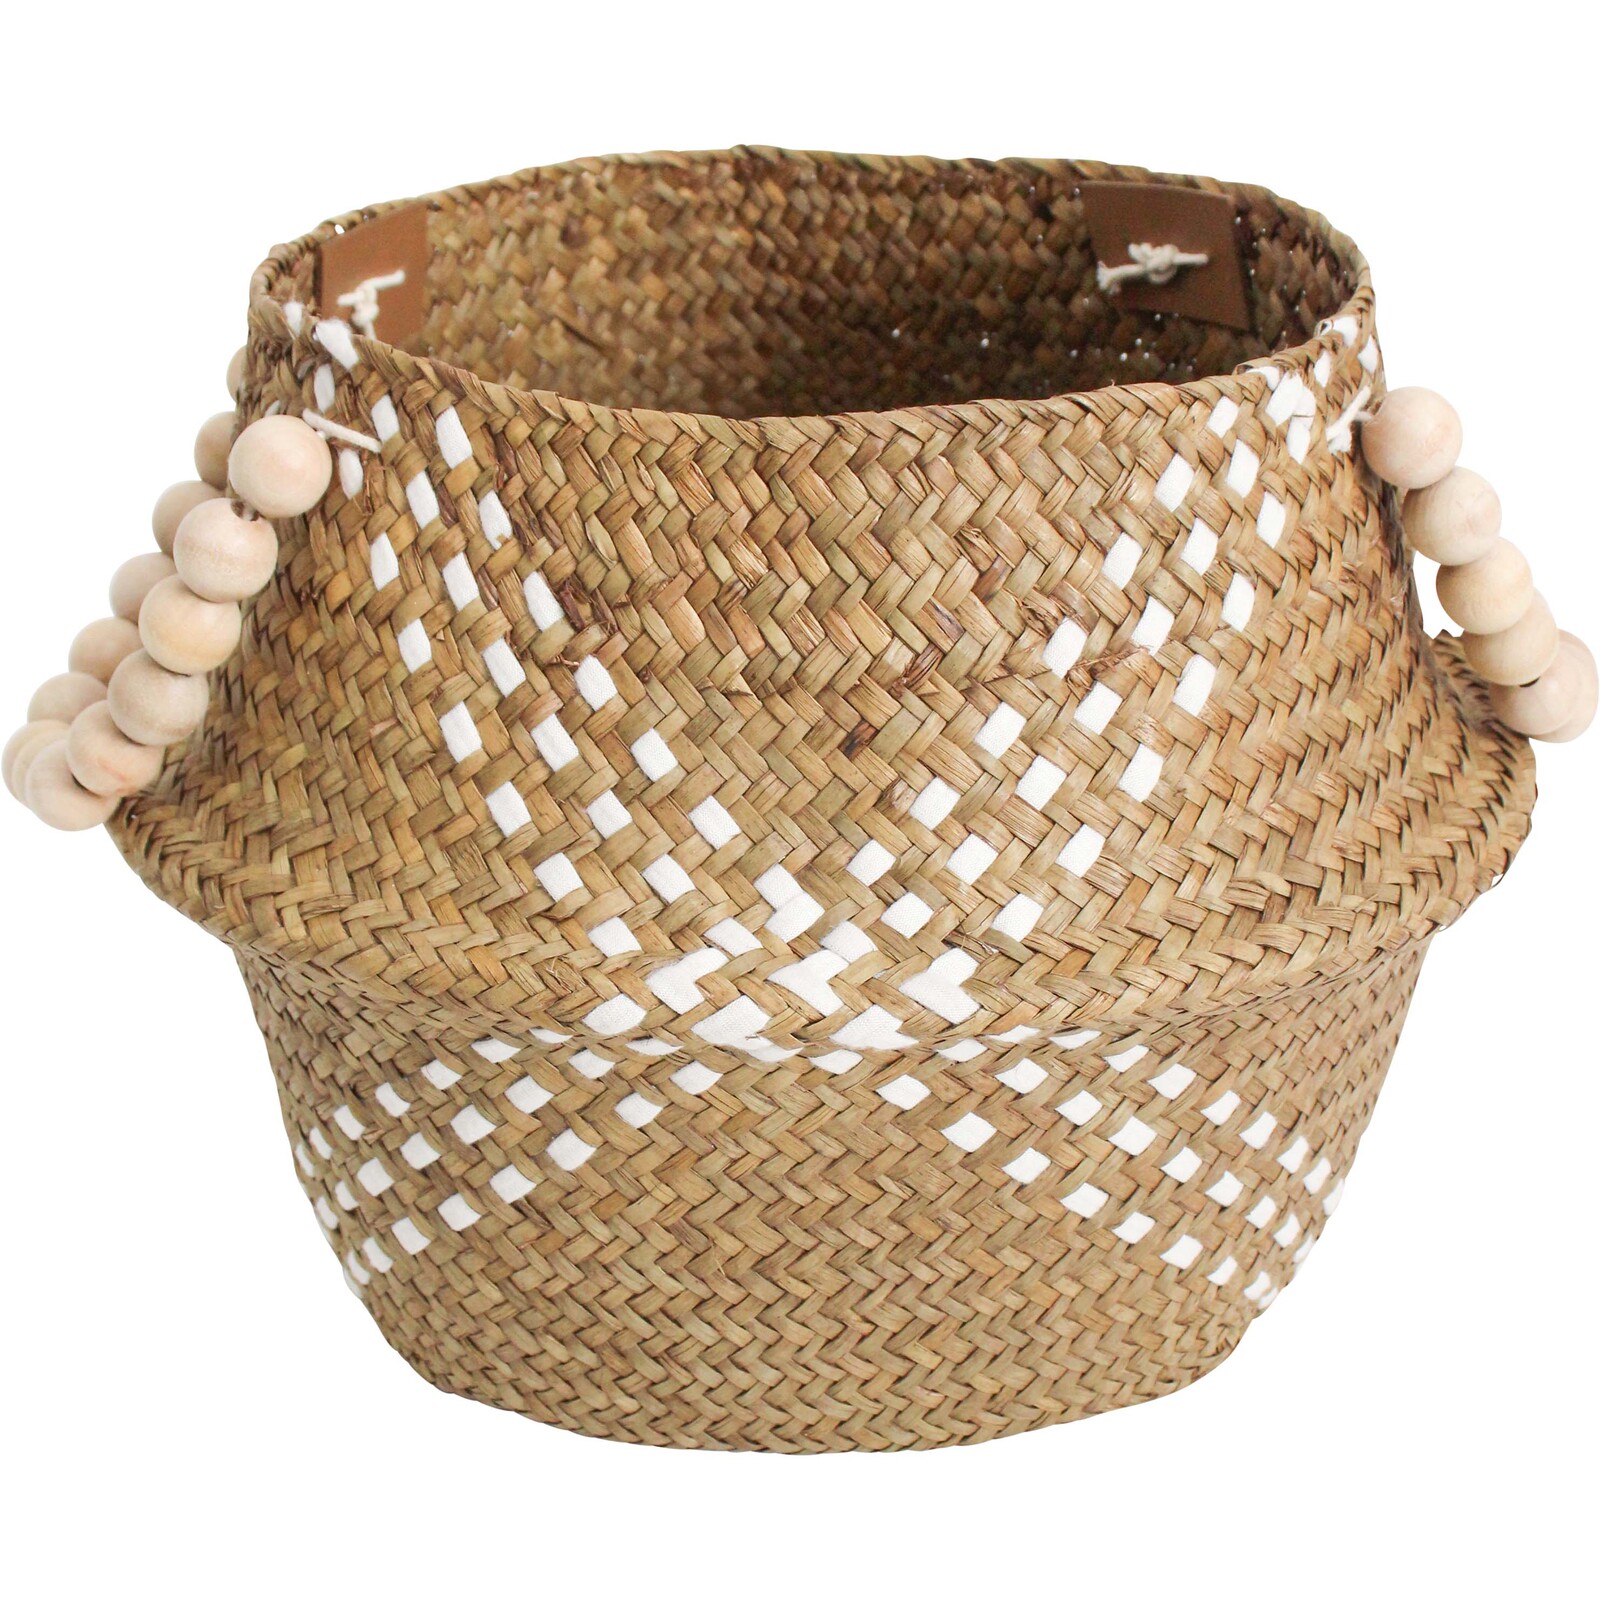 Belly Basket TwoTone/Nat Beads